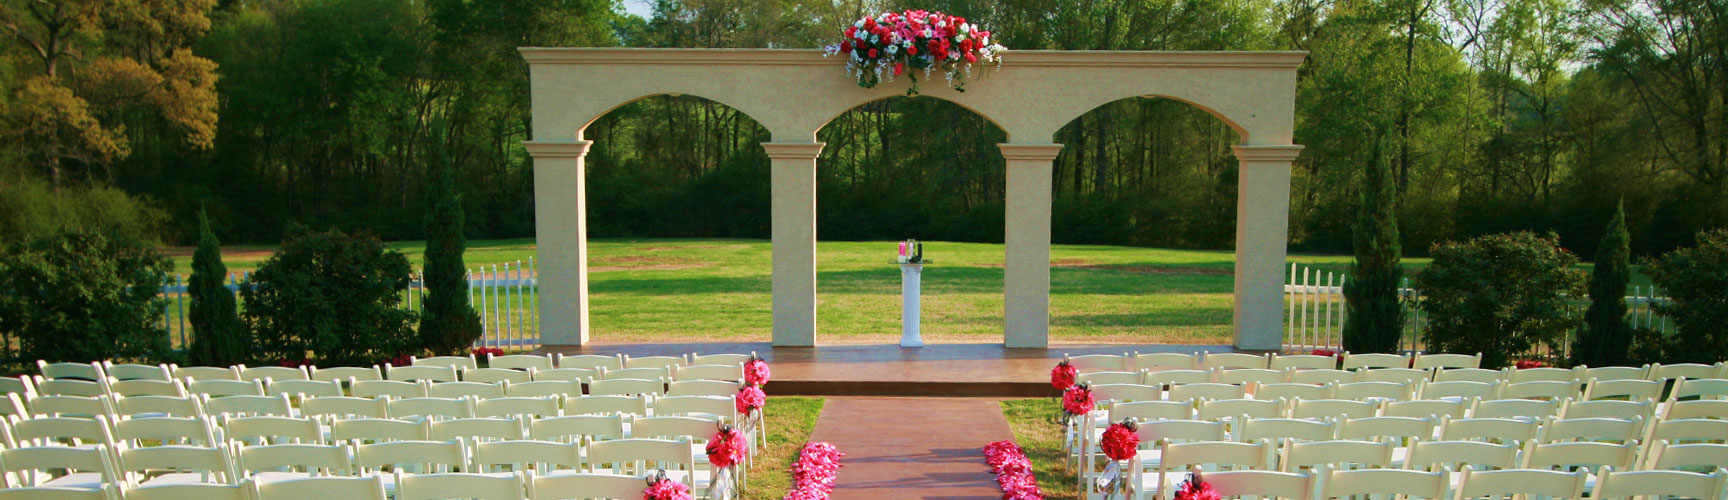 The Perfect Venue to Say I Do!